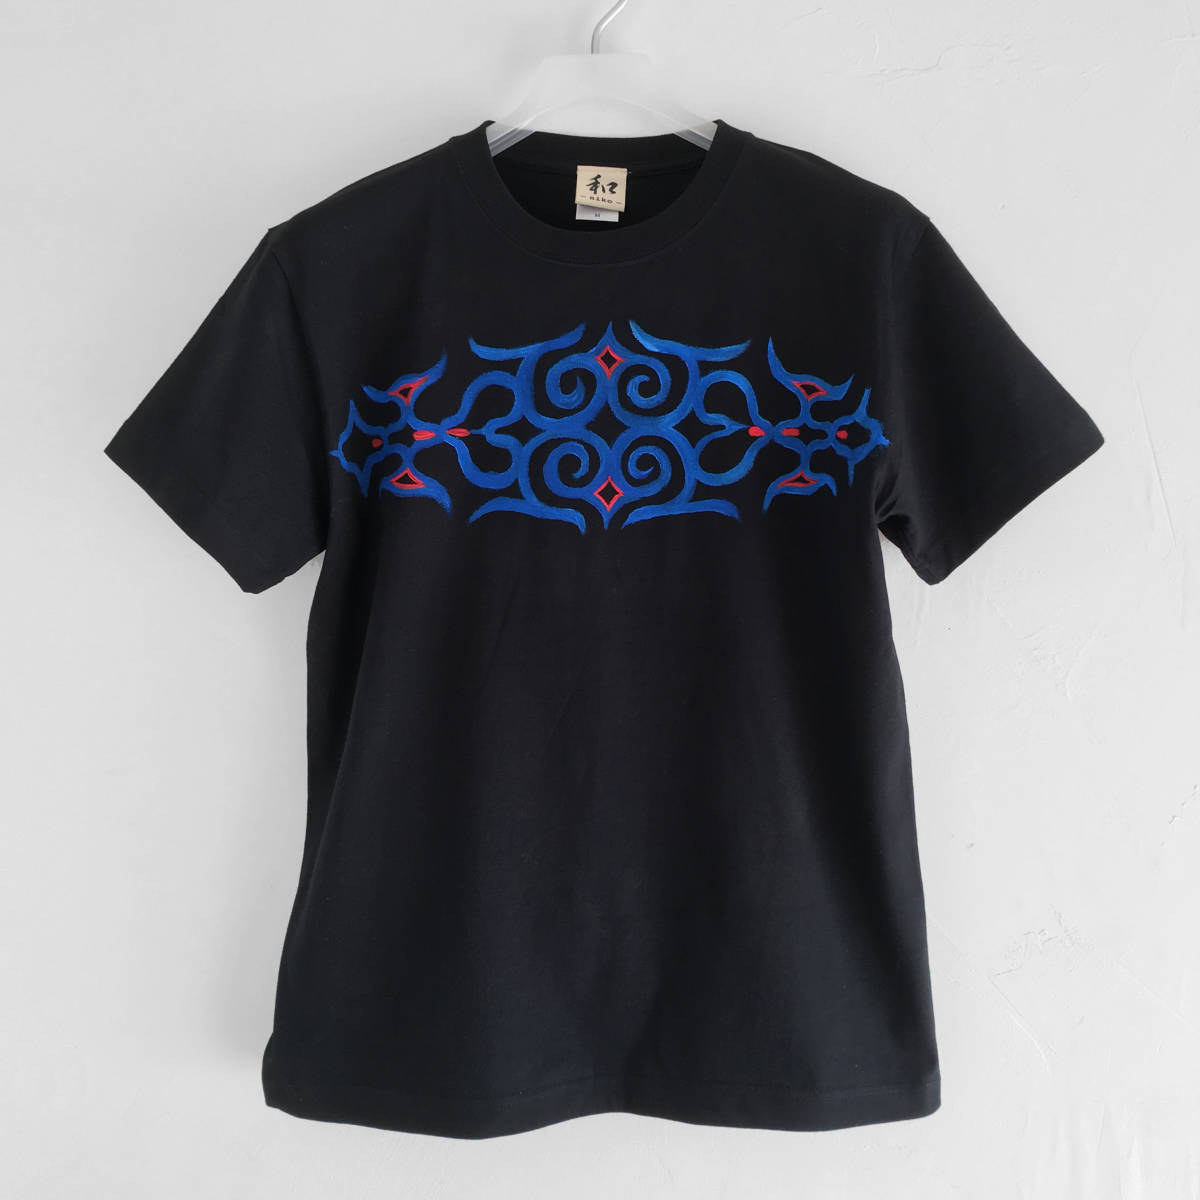 Men's Ainu Arabesque and Owl Pattern T-Shirt, XL Size, Black, Hand-drawn Ainu Pattern T-Shirt, Japanese Pattern, XL size and above, Crew neck, Patterned